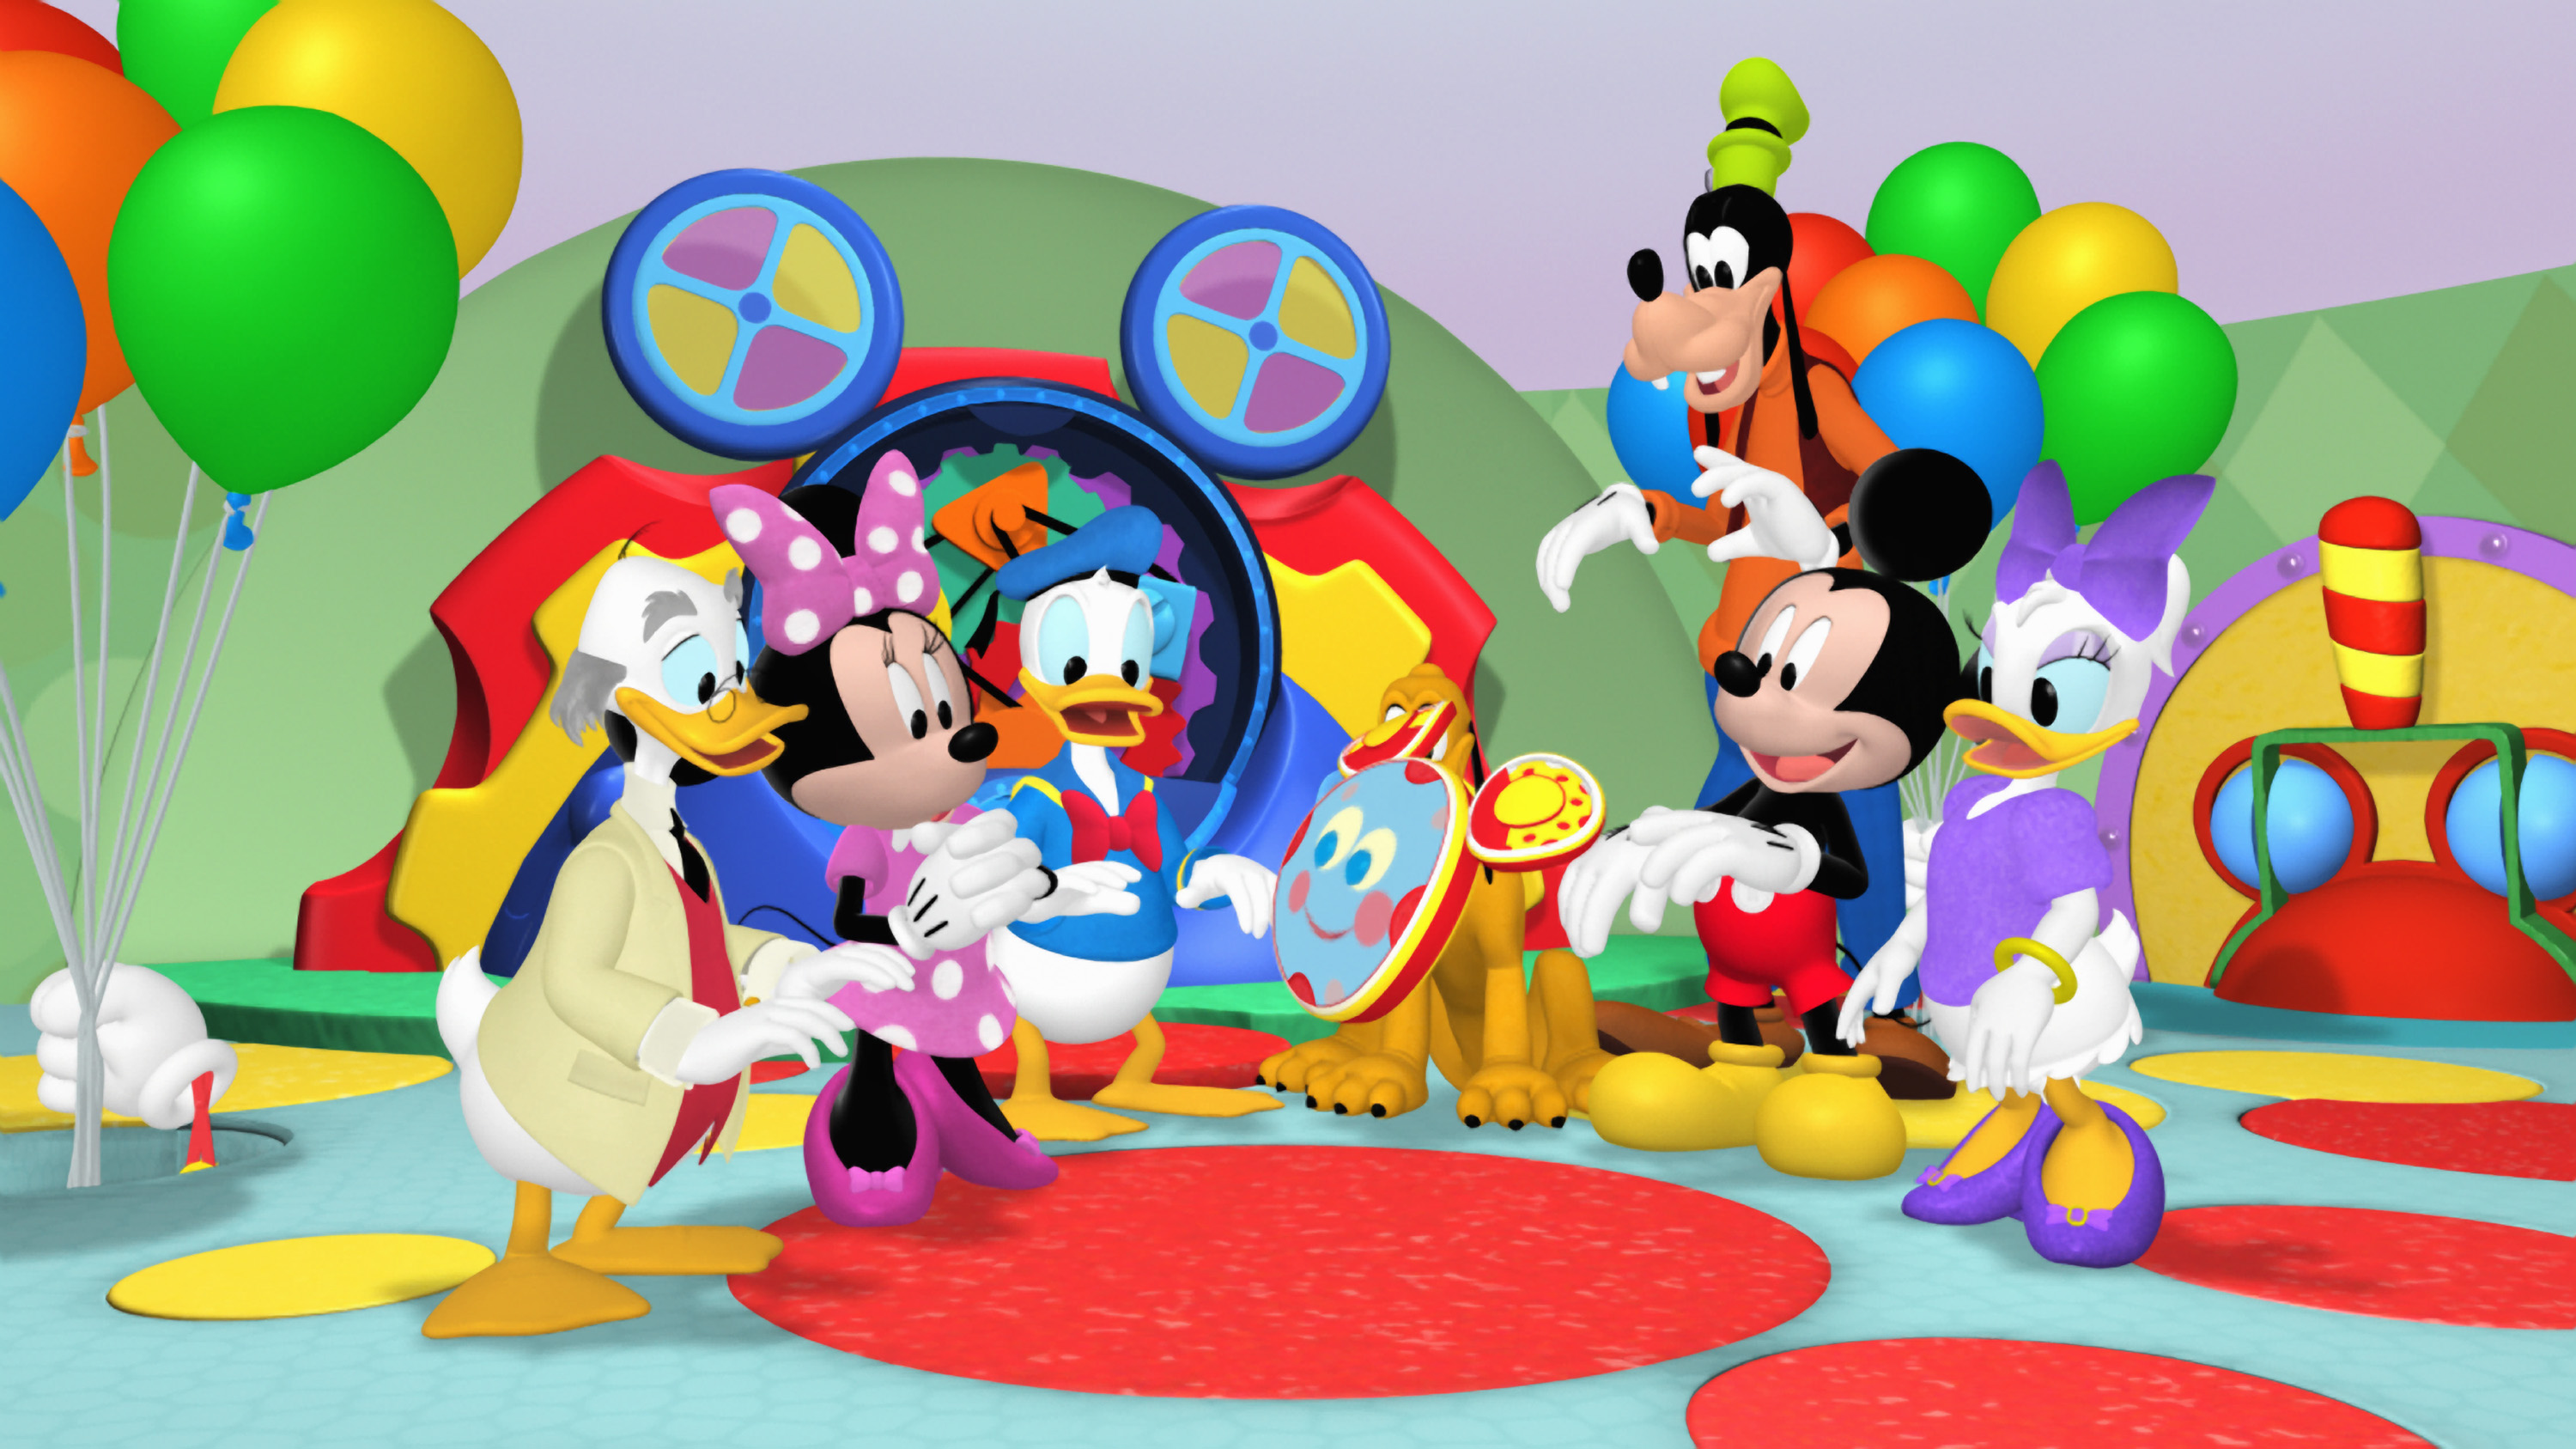 Download 21 mickey-mouse-club-house-wallpapers Mickey-mouse-clubhouse-images-wallpapers-SF-Wallpaper.jpg